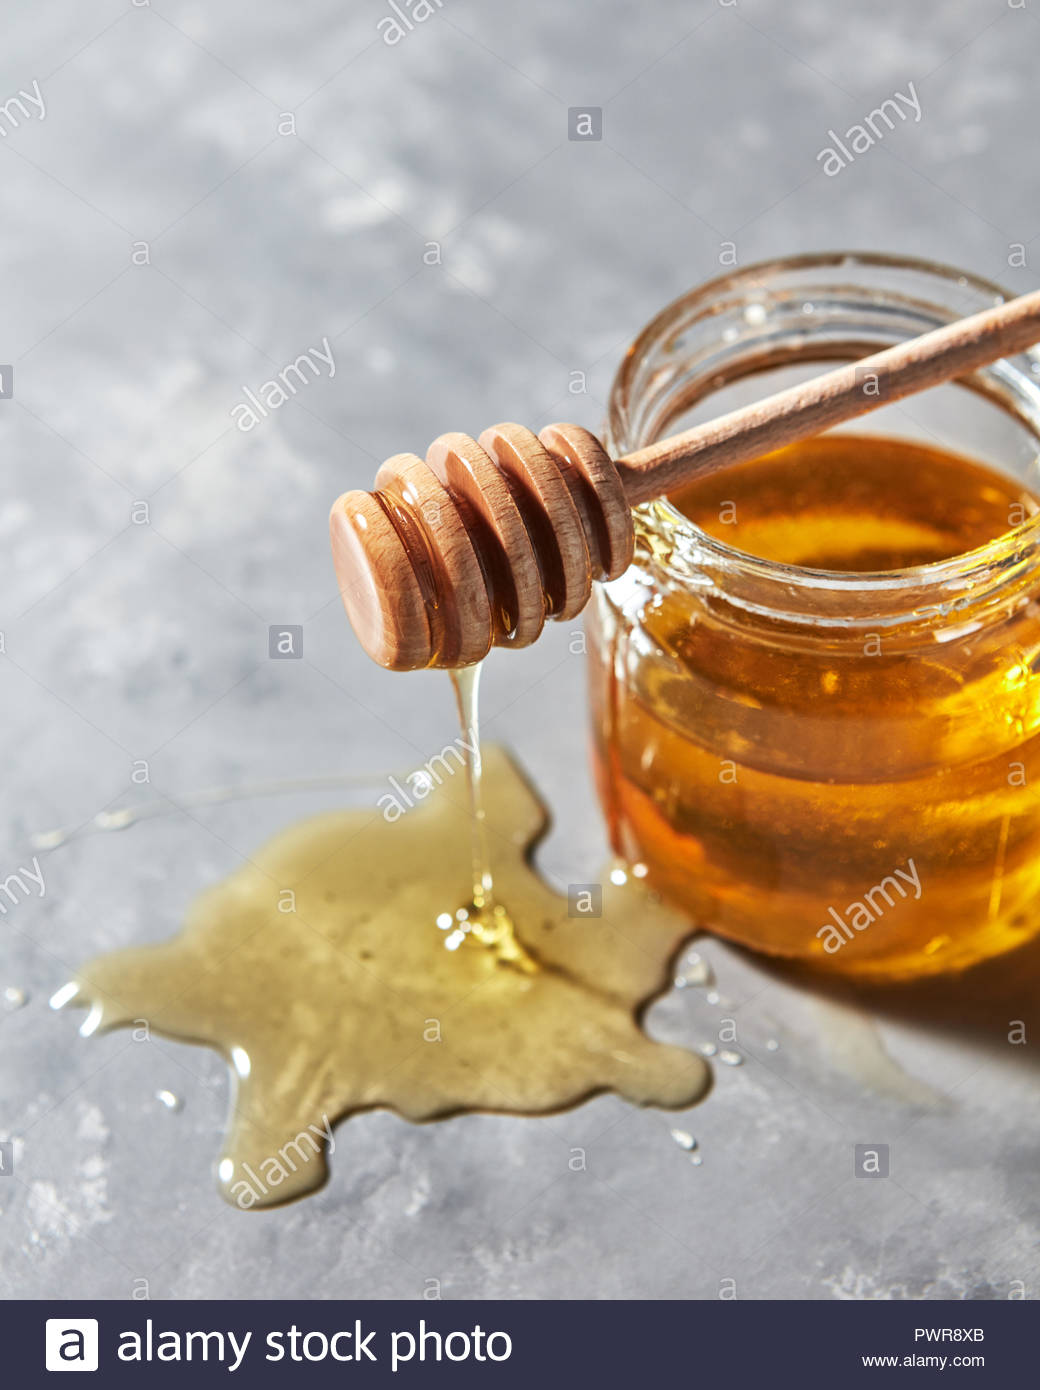 Dripping Sweet Honey Into A Puddle Of Fresh Organic Syrup On